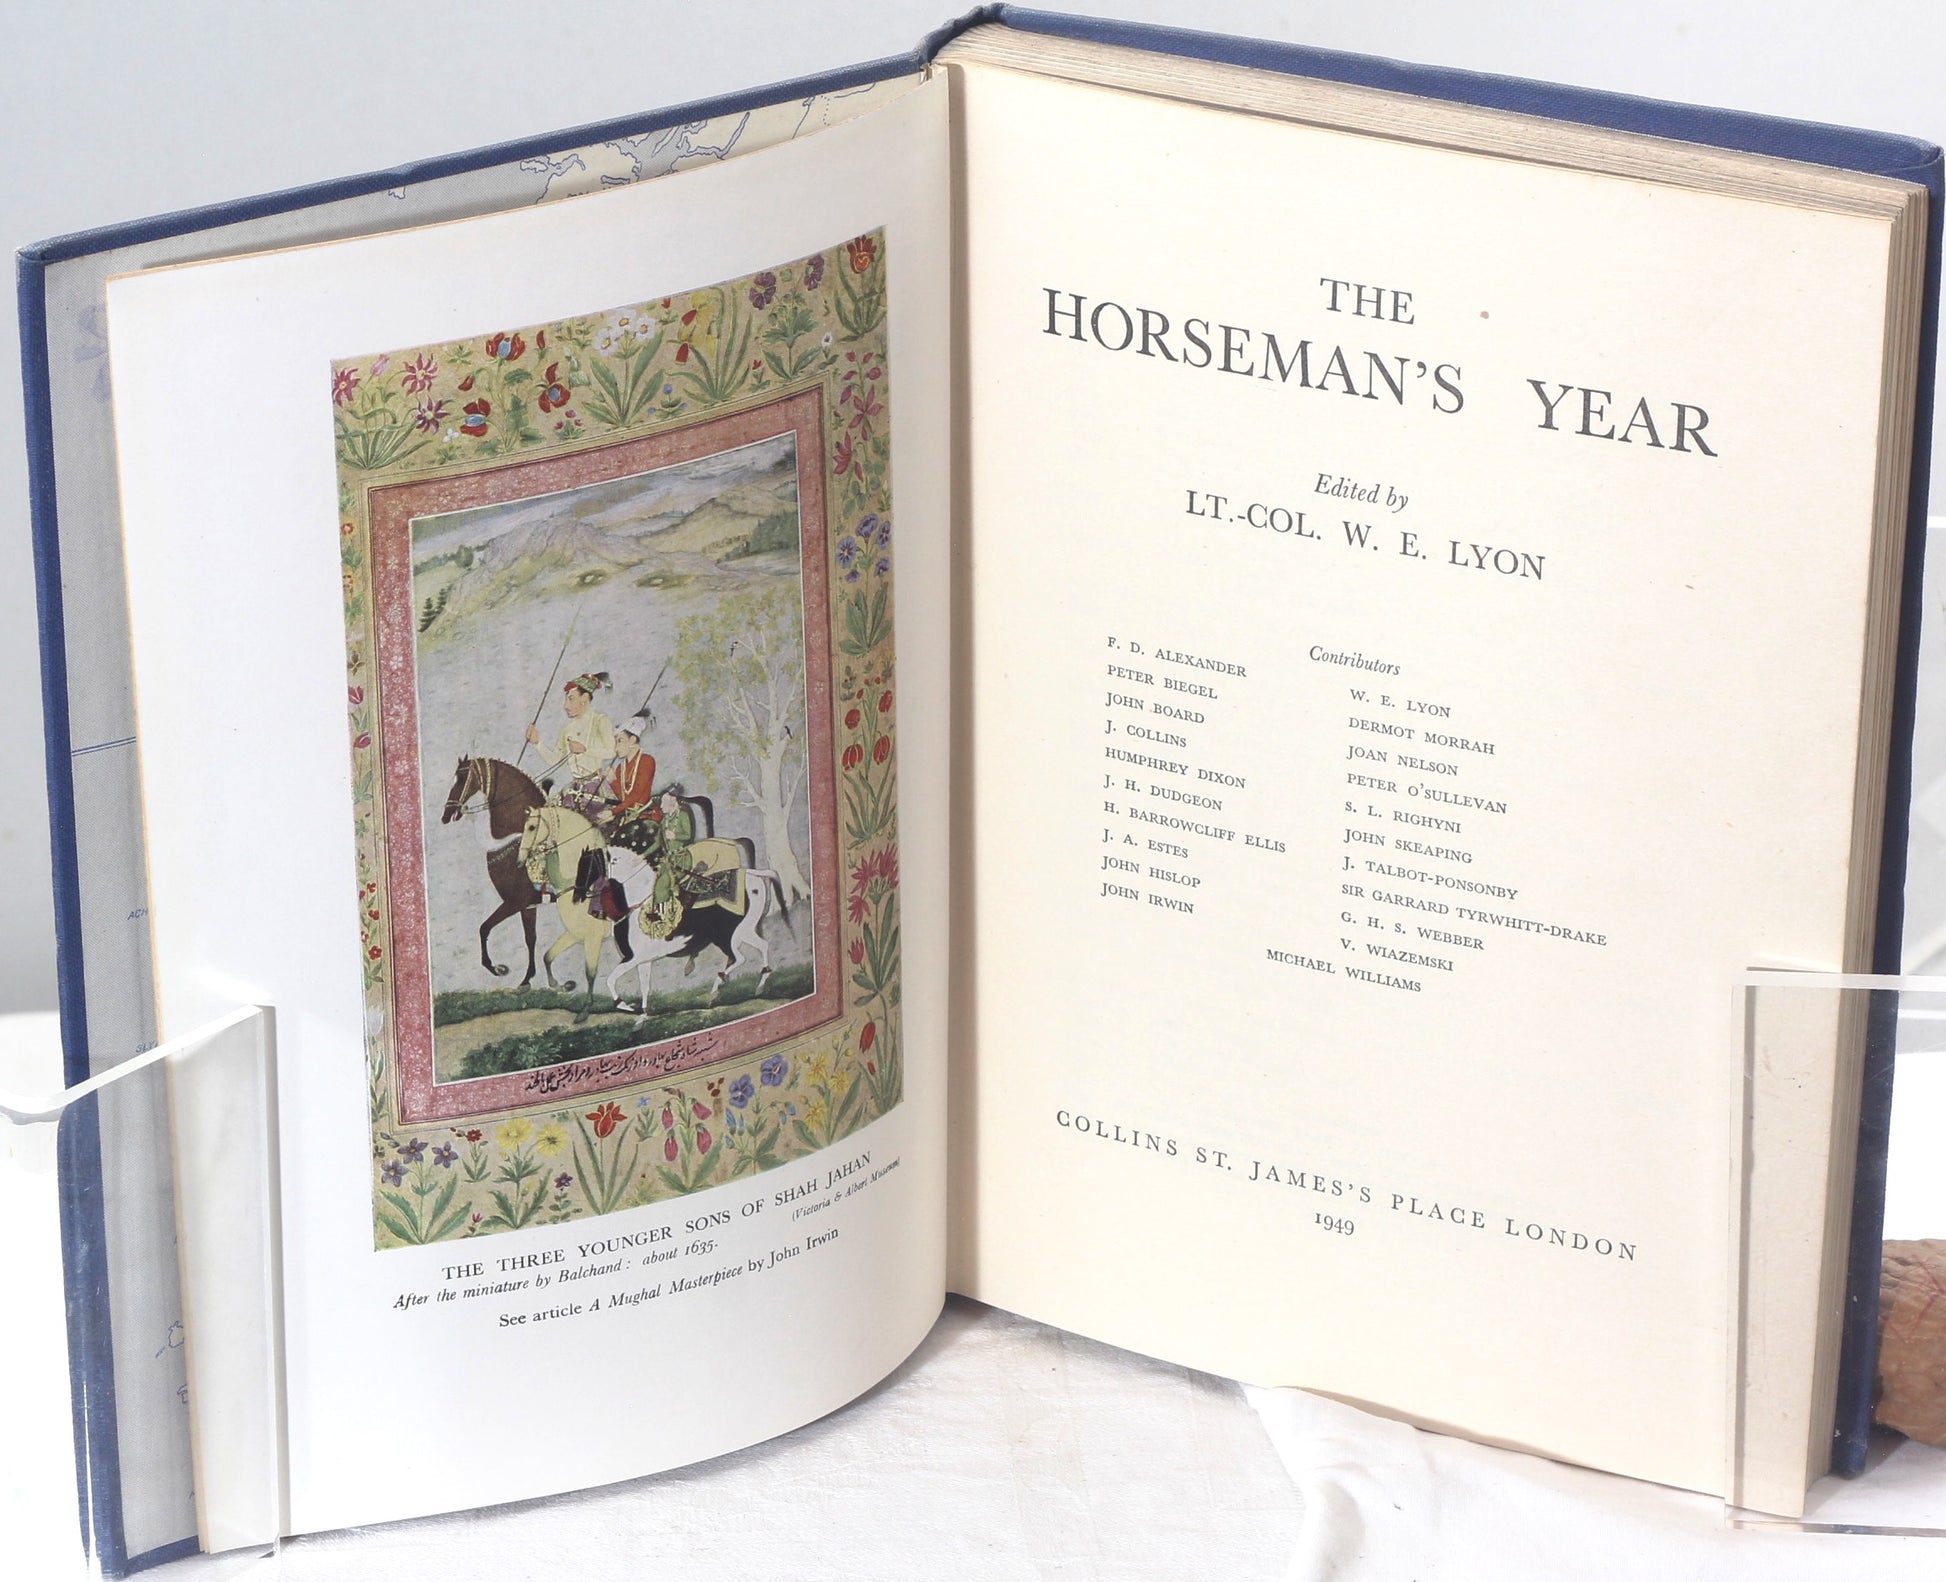 The Horseman's Year 1948-49, Edited by Lt.Col. W.E.Lyon